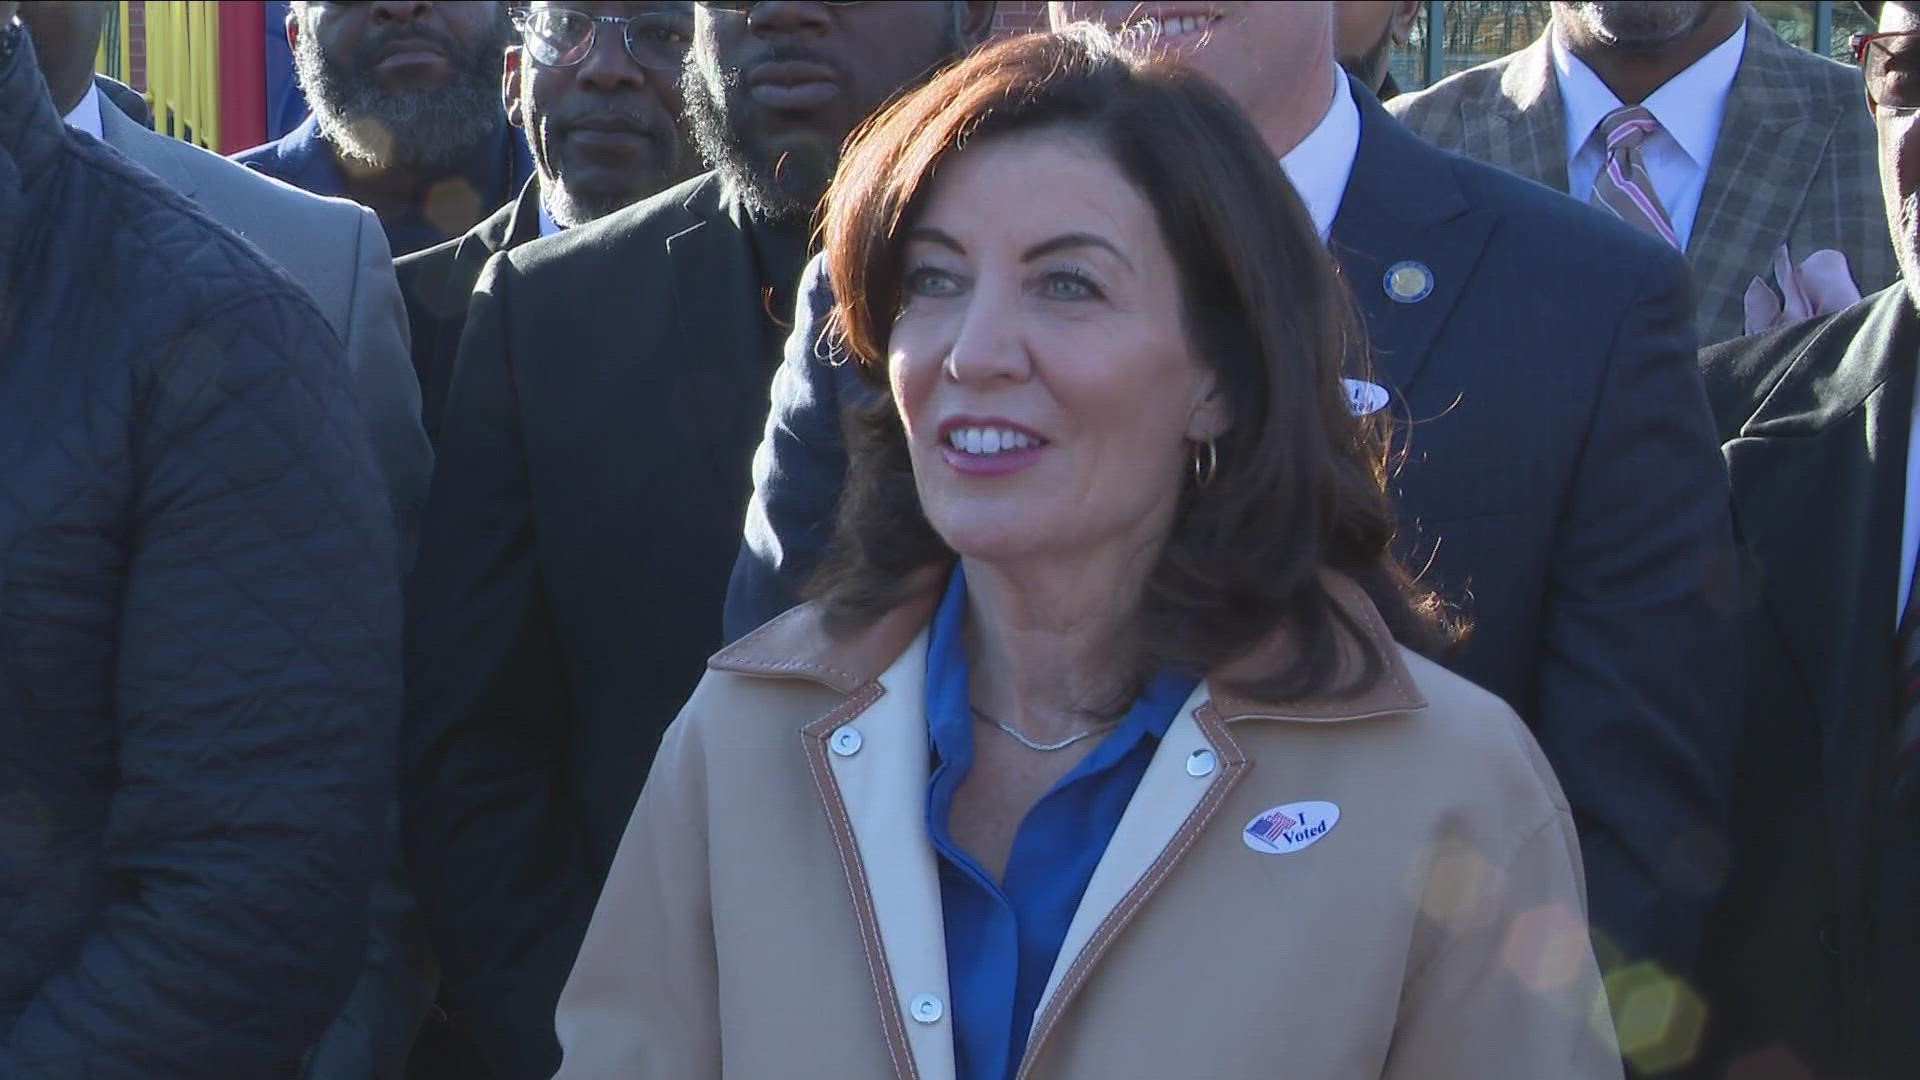 New York's governor cast her vote Saturday morning at the Delavan Grider Community Center, alongside Democratic Party leaders.